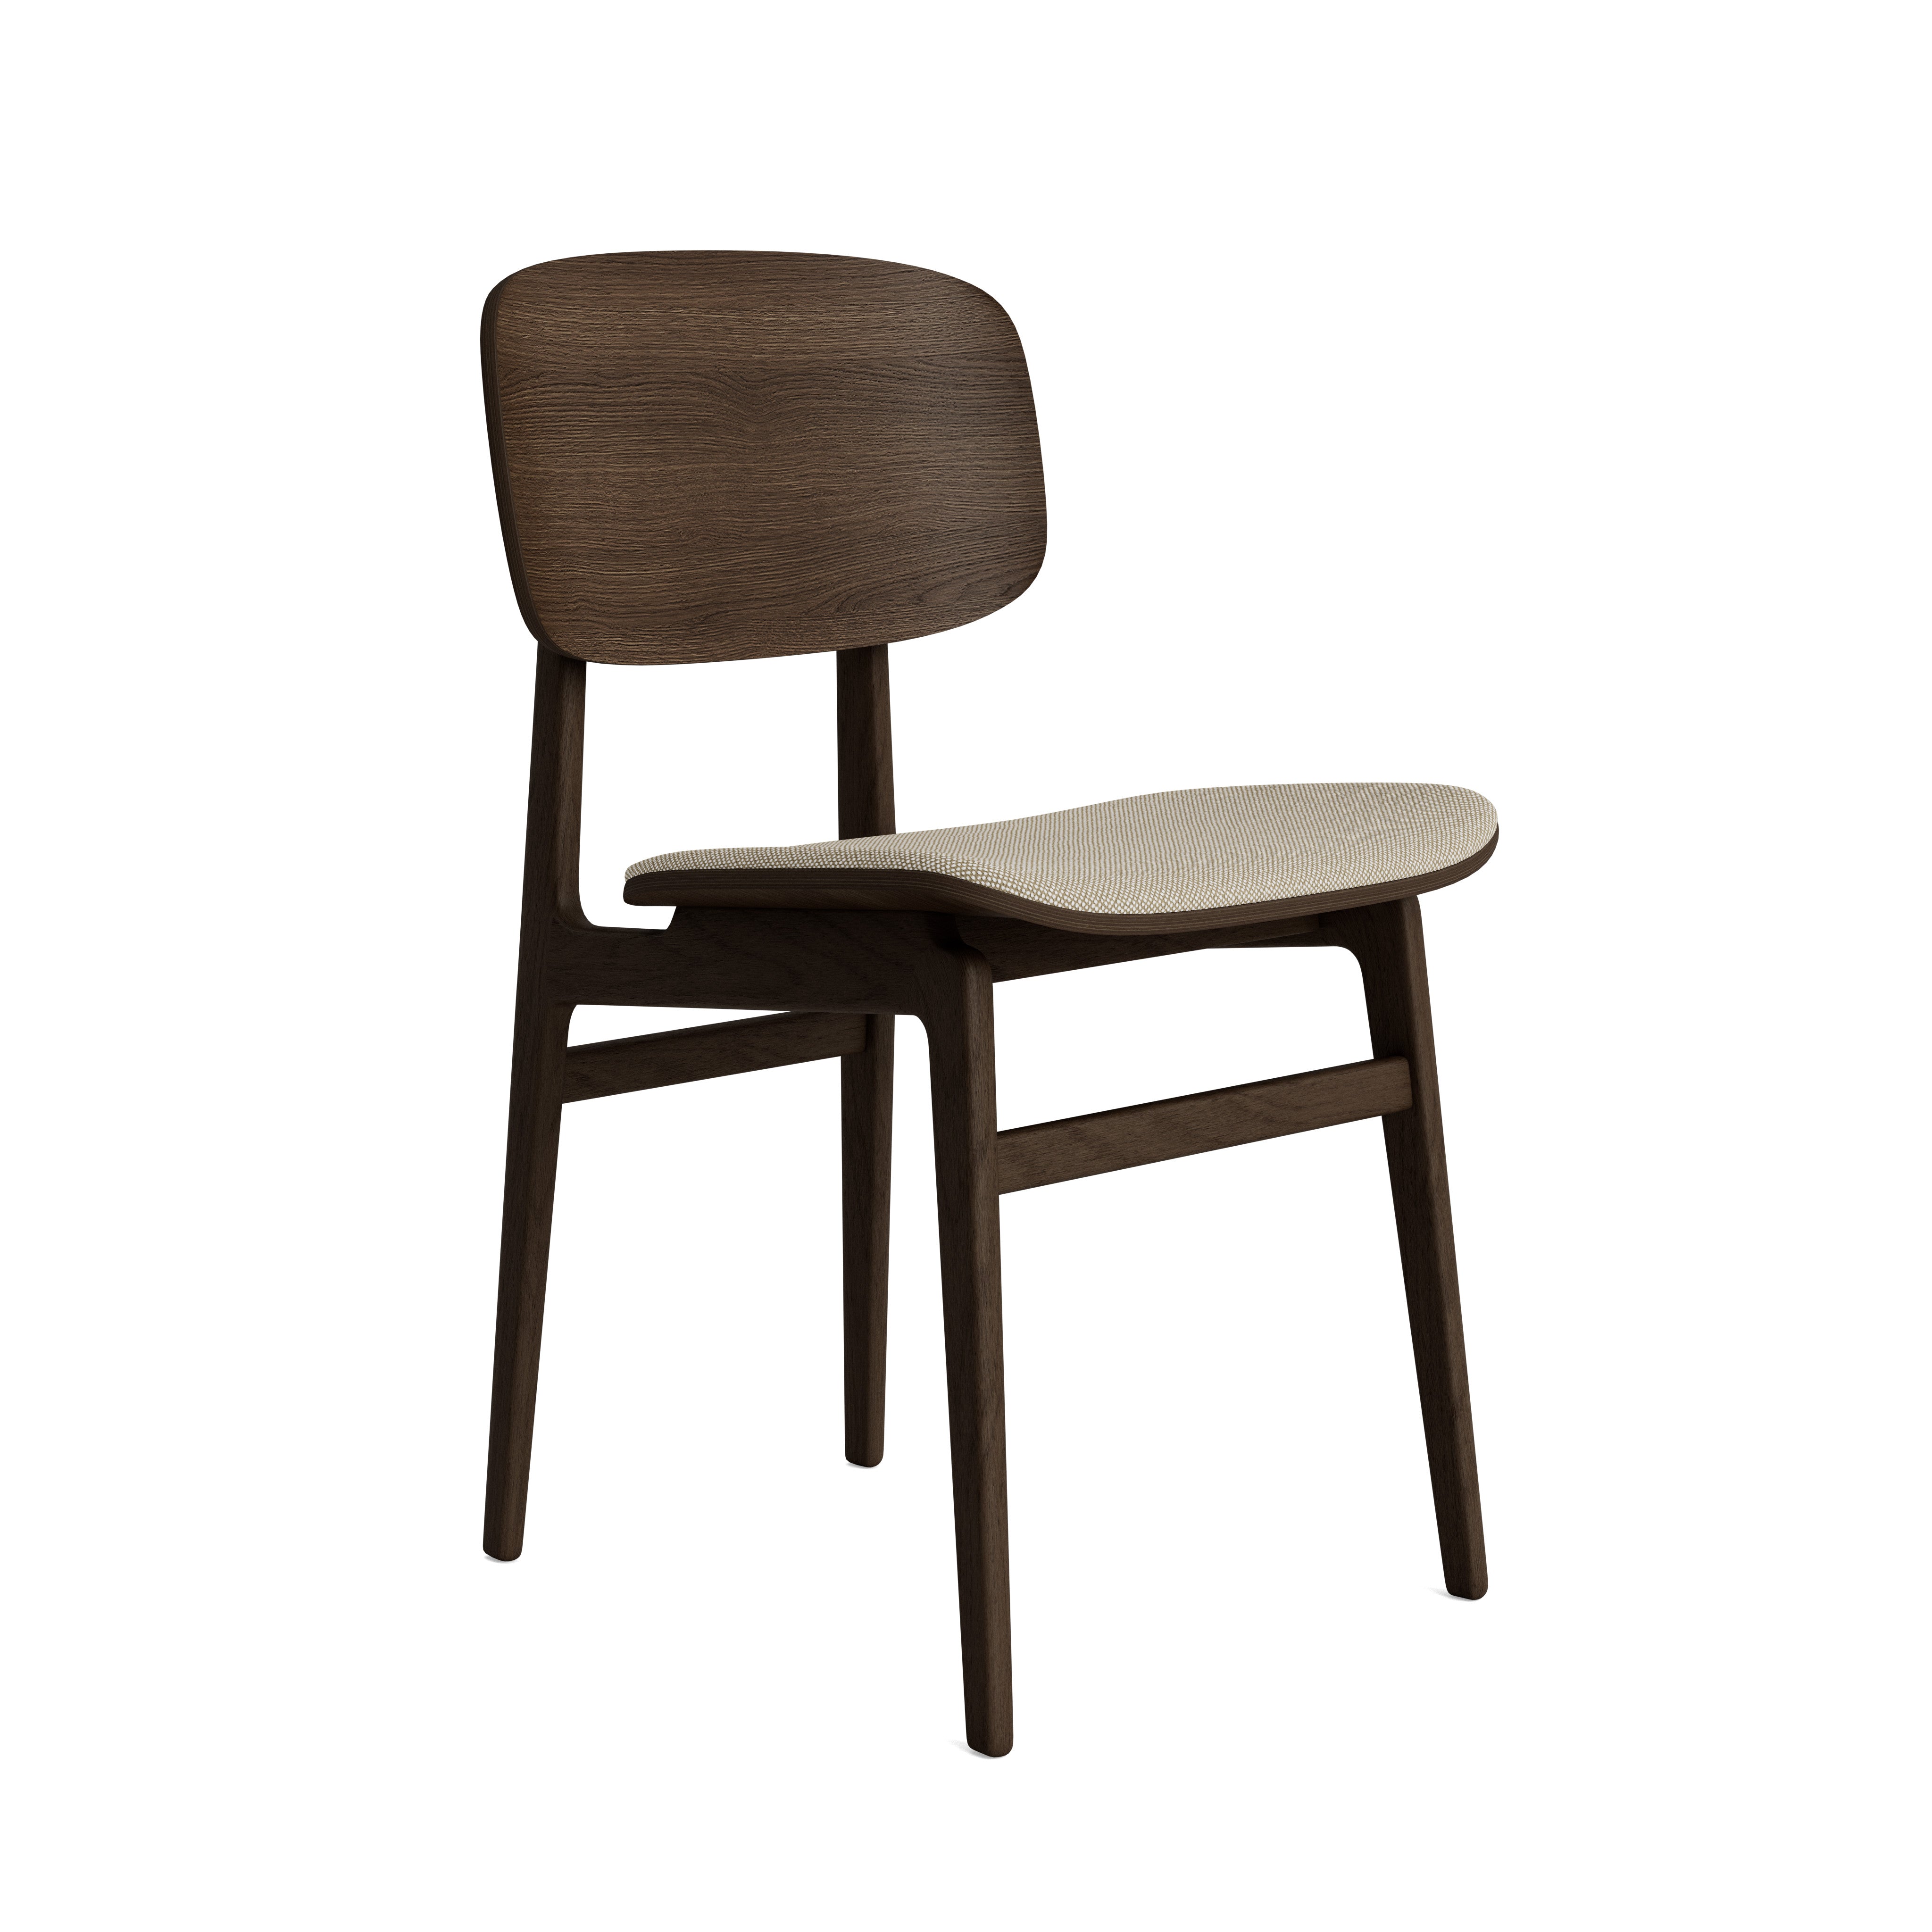 NY11 Chair |Leather Seat